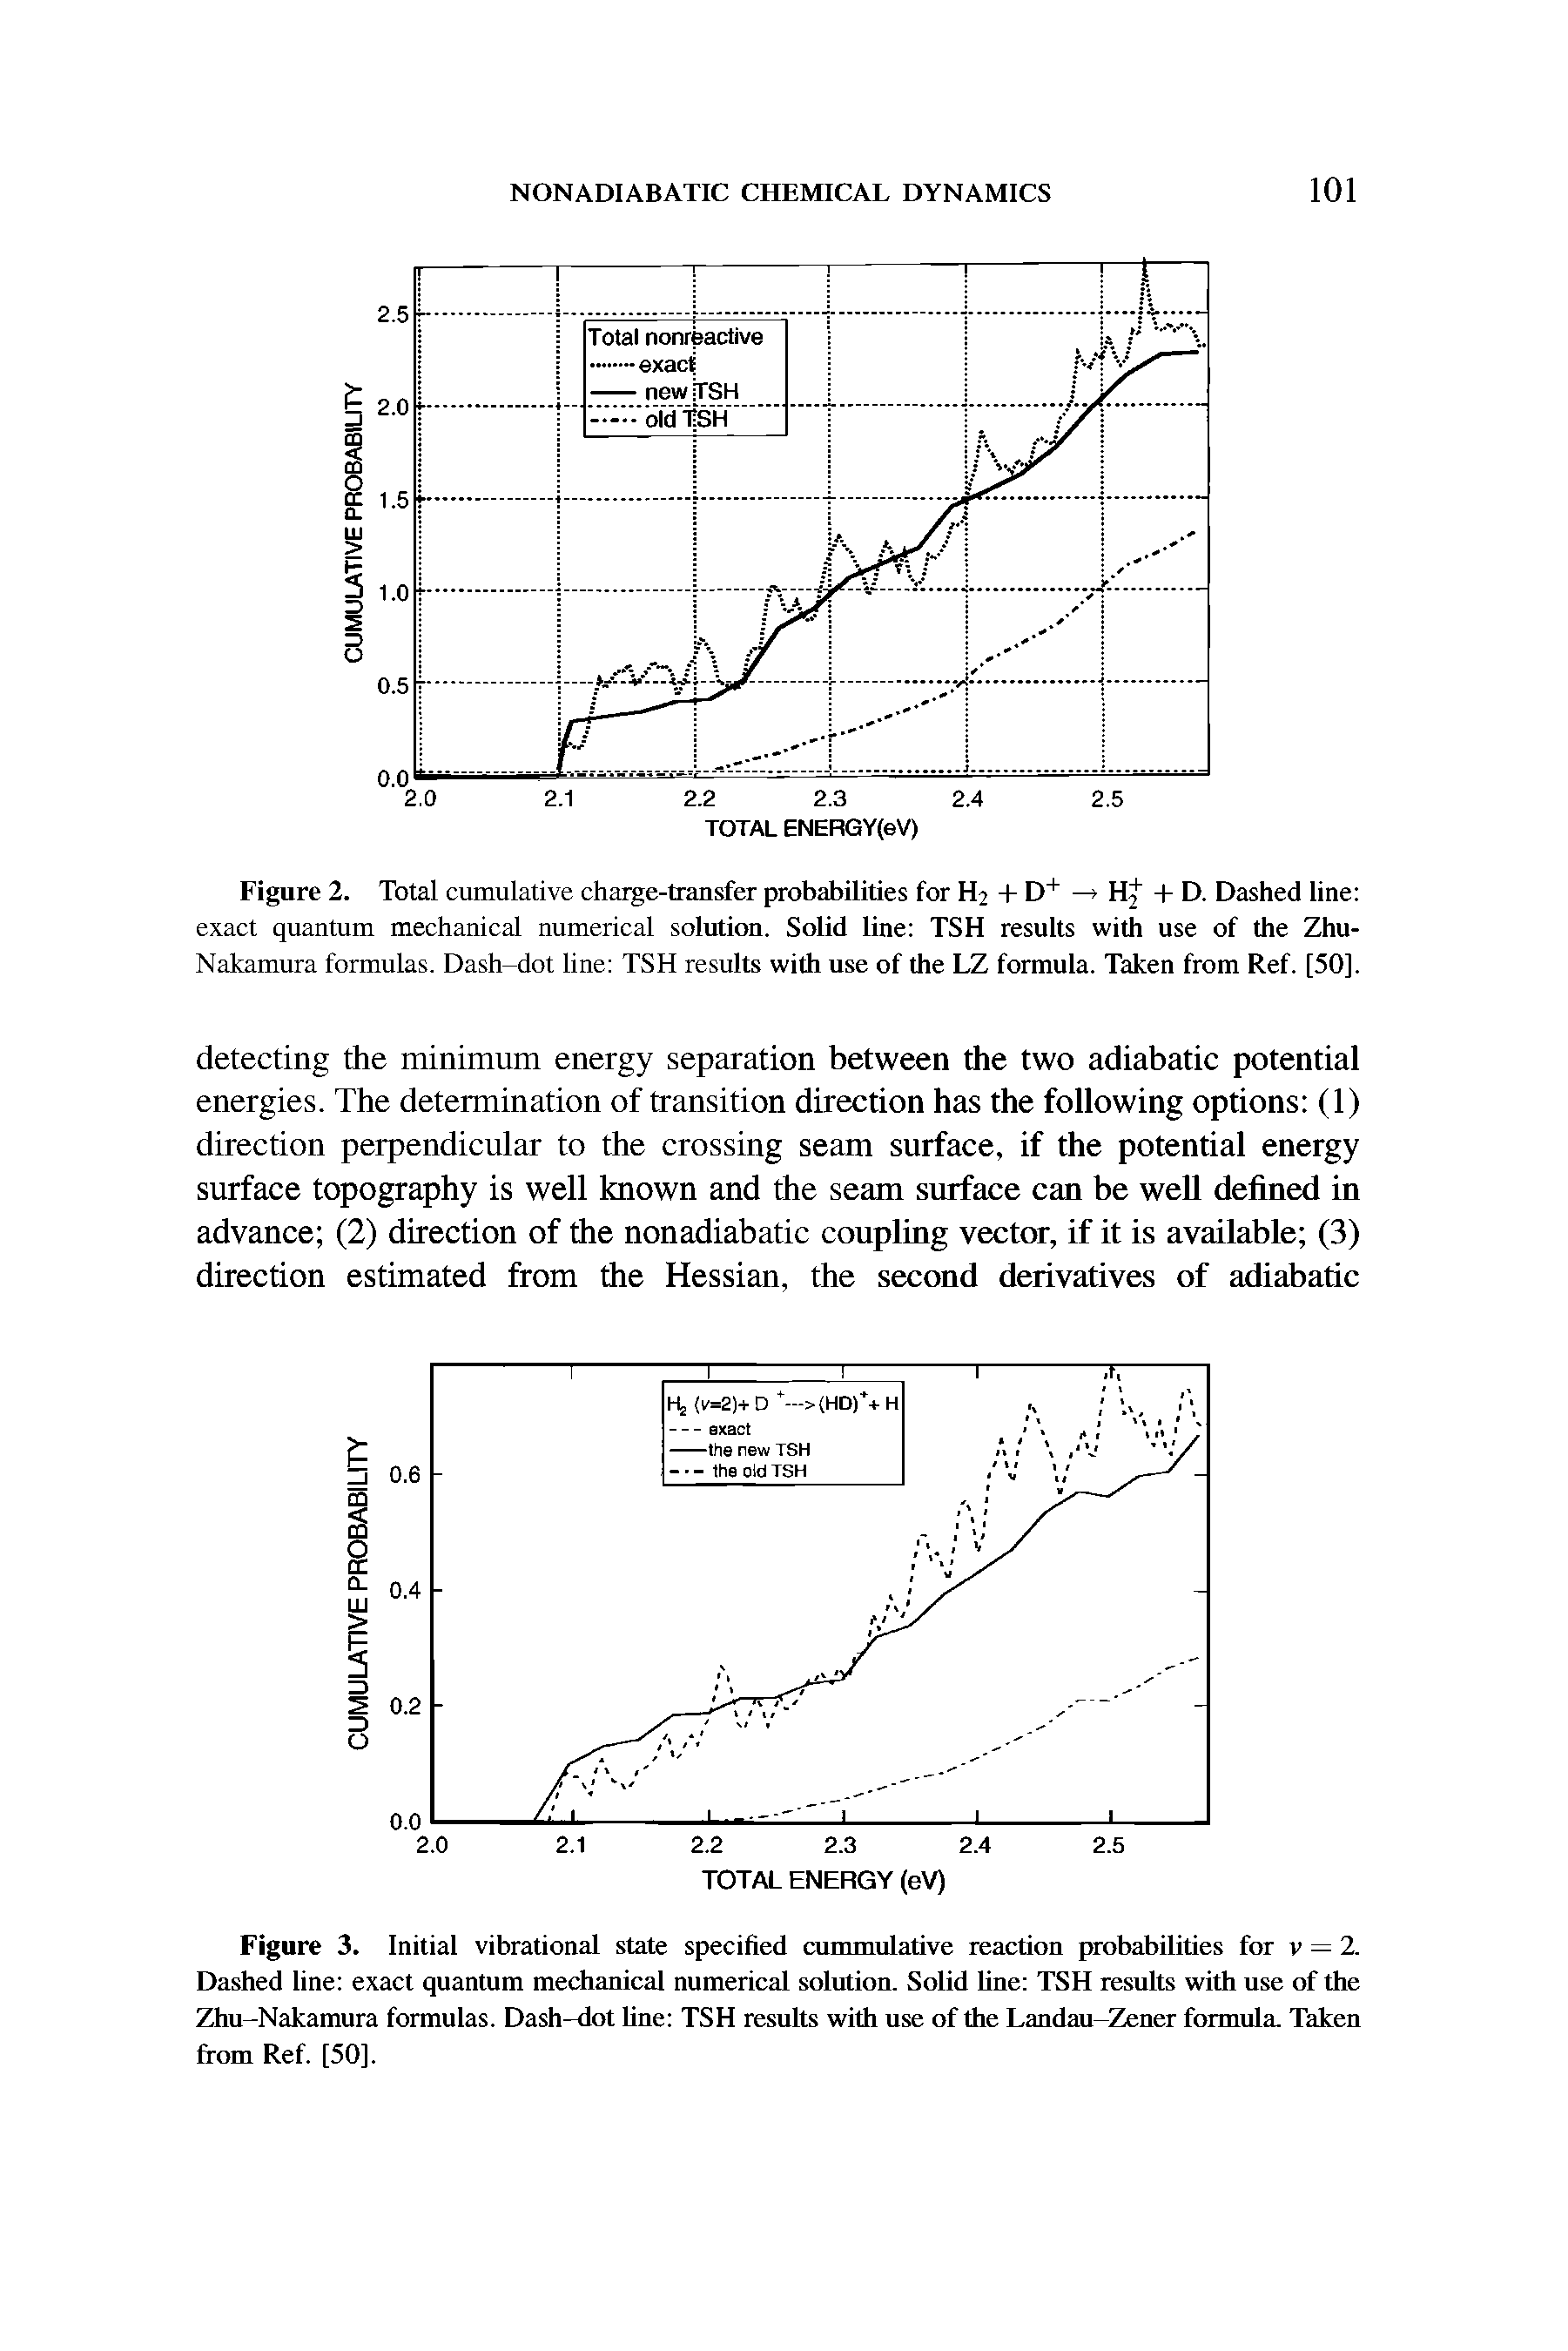 Figure 3. Initial vibrational state specified cummulative reaction probabilities for v = 2. Dashed line exact quantum mechanical numerical solution. Solid hue TSH results with use of the Zhu-Nakamura formulas. Dash-dot hue TSH results with use of the Landau-Zener formula. Taken from Ref. [50].